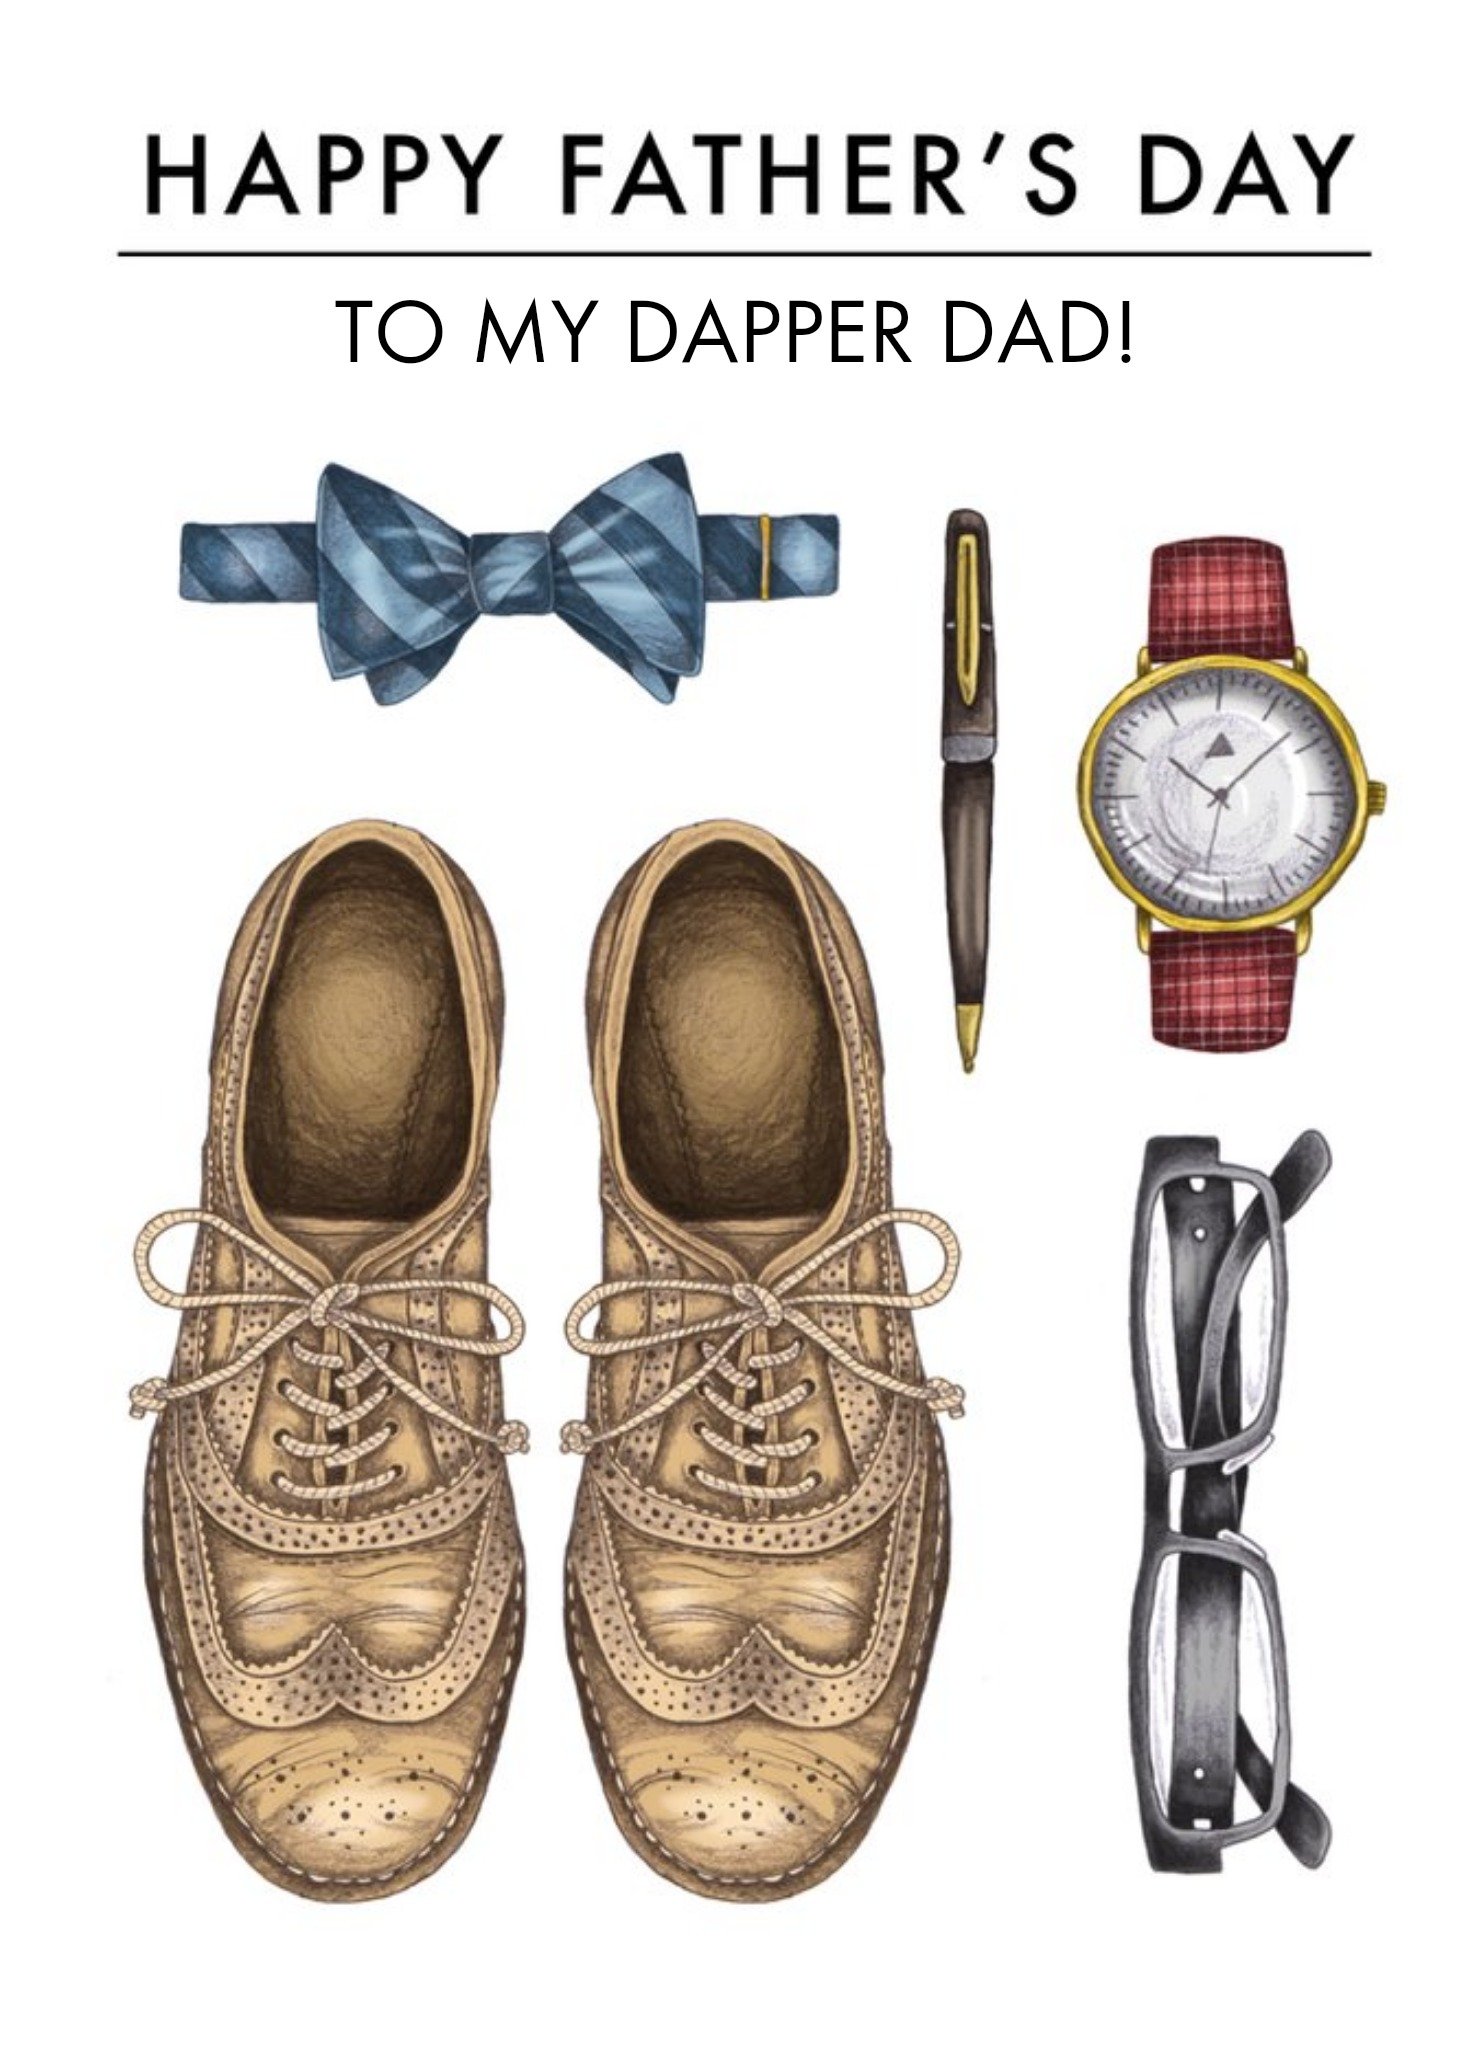 Moonpig To My Dapper Dad Happy Father's Day Card Ecard